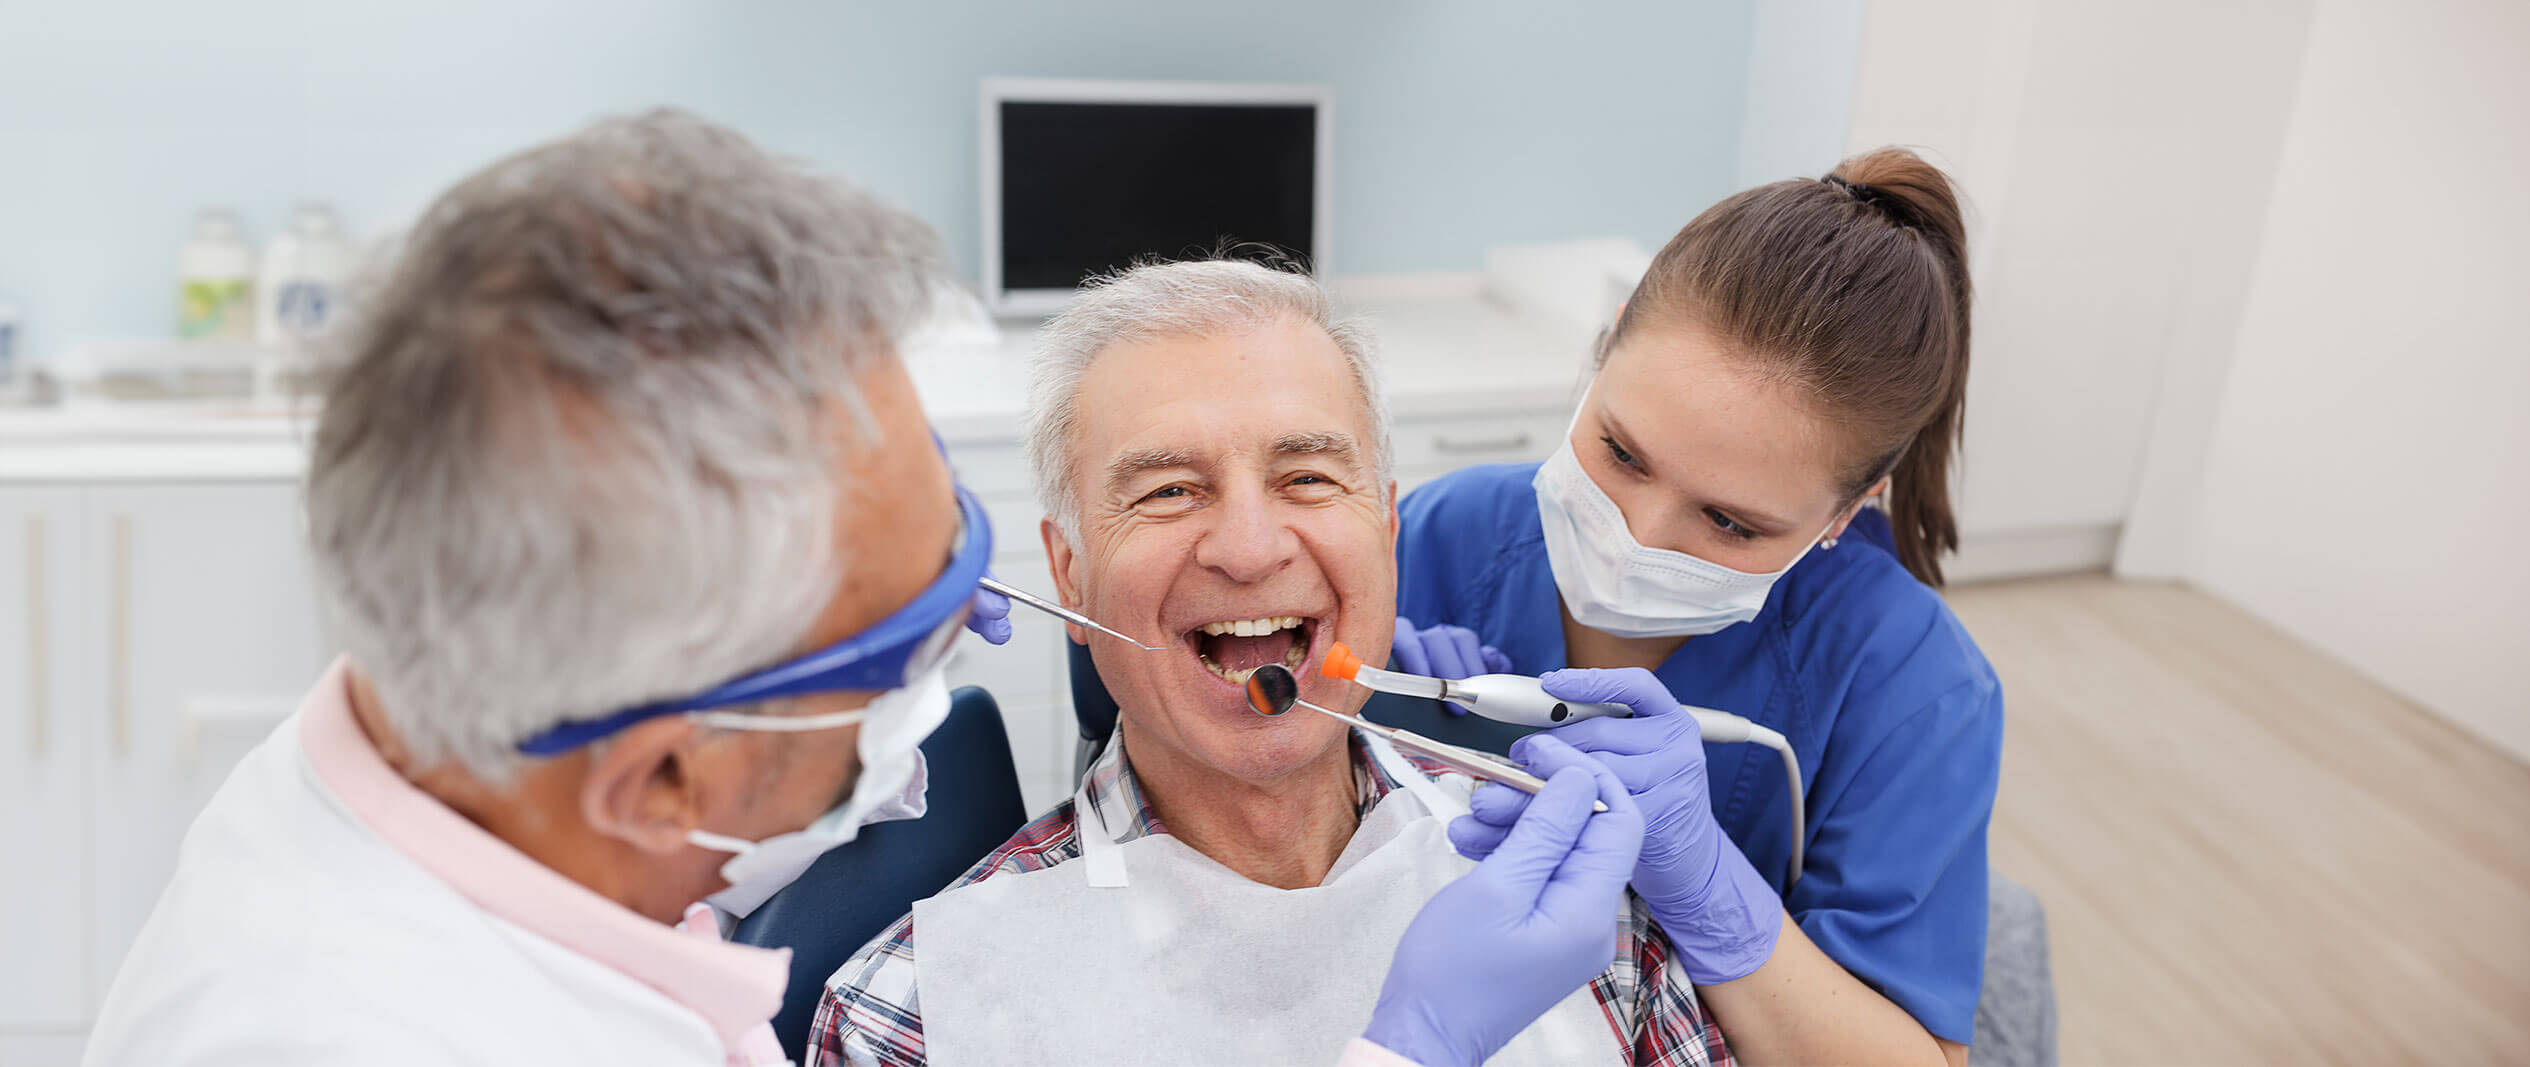 This is a playful image of dental staff providing periodontics treatment to a smiling man.